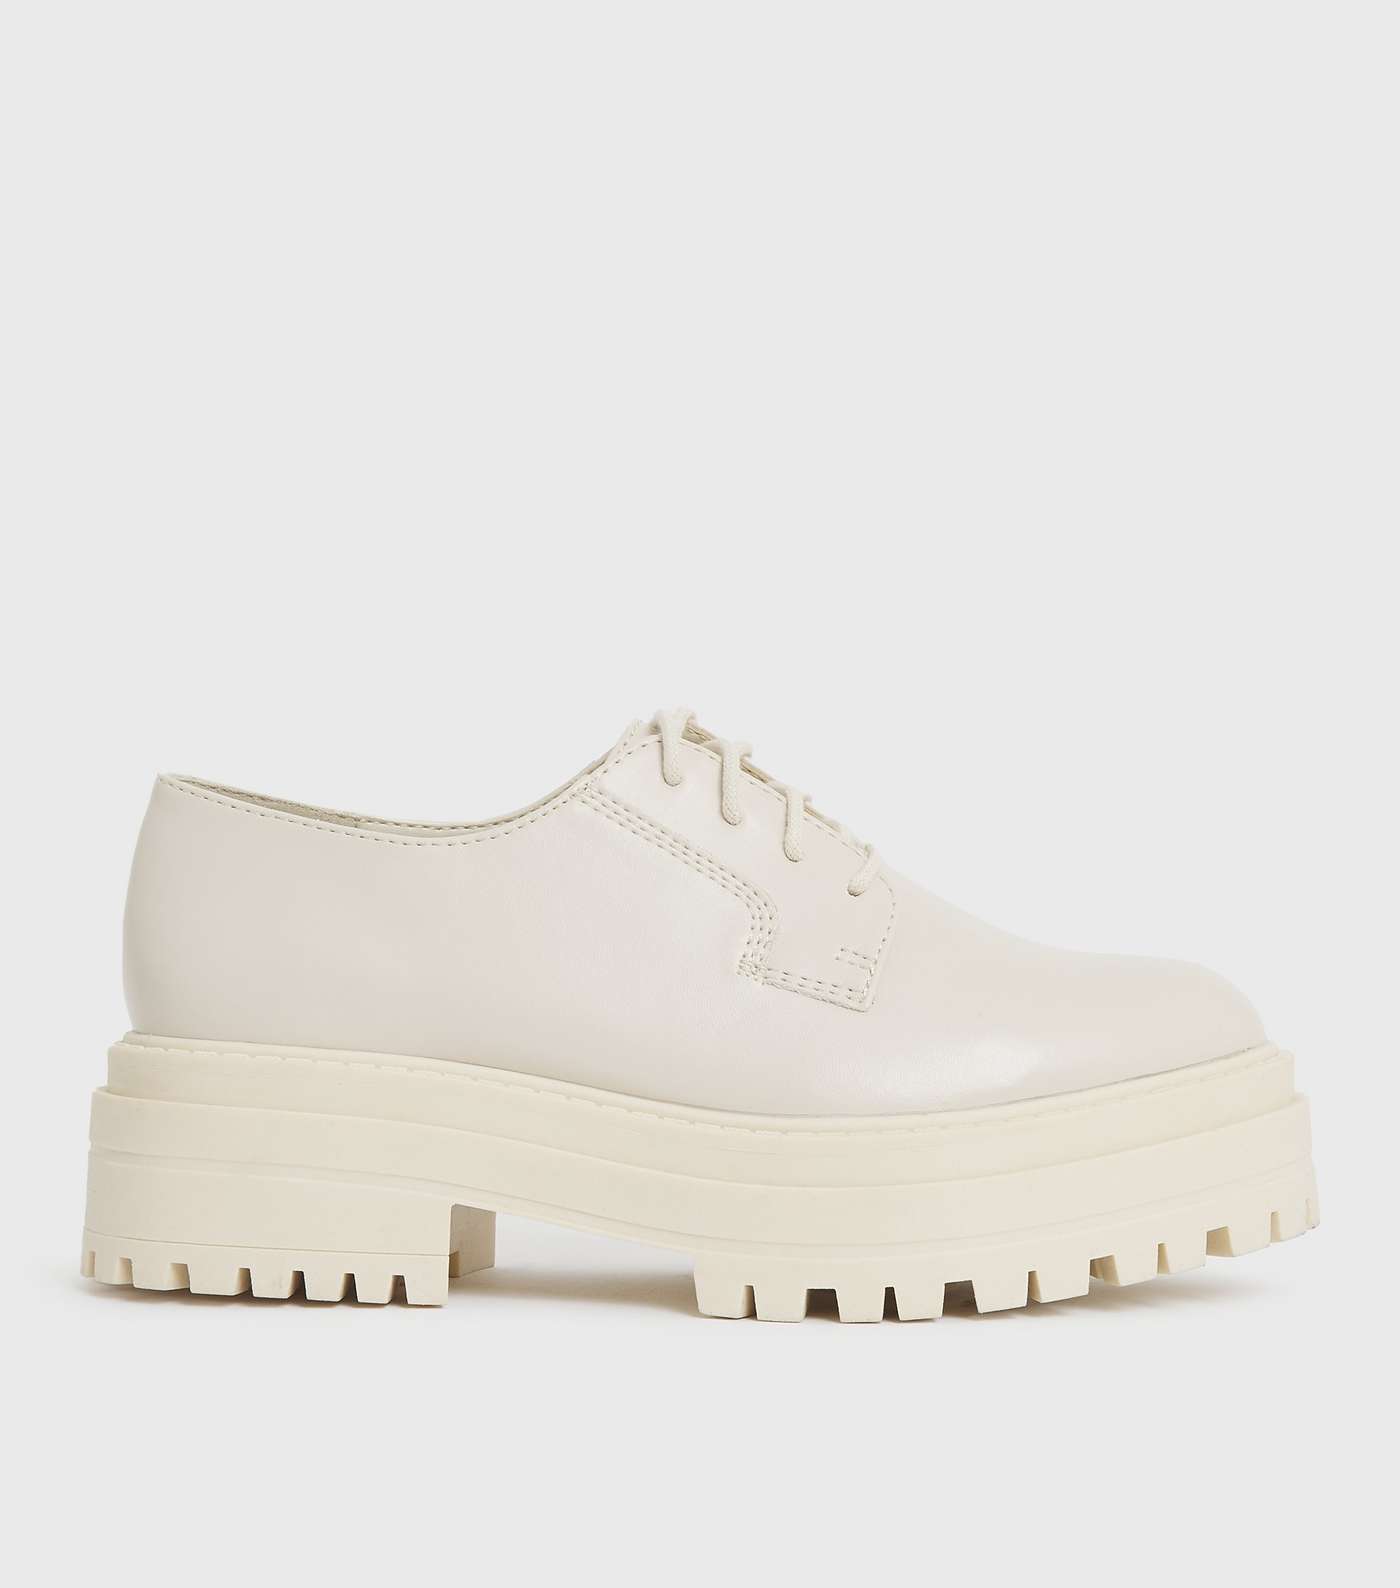 Off White Chunky Cleated Lace Up Brogues